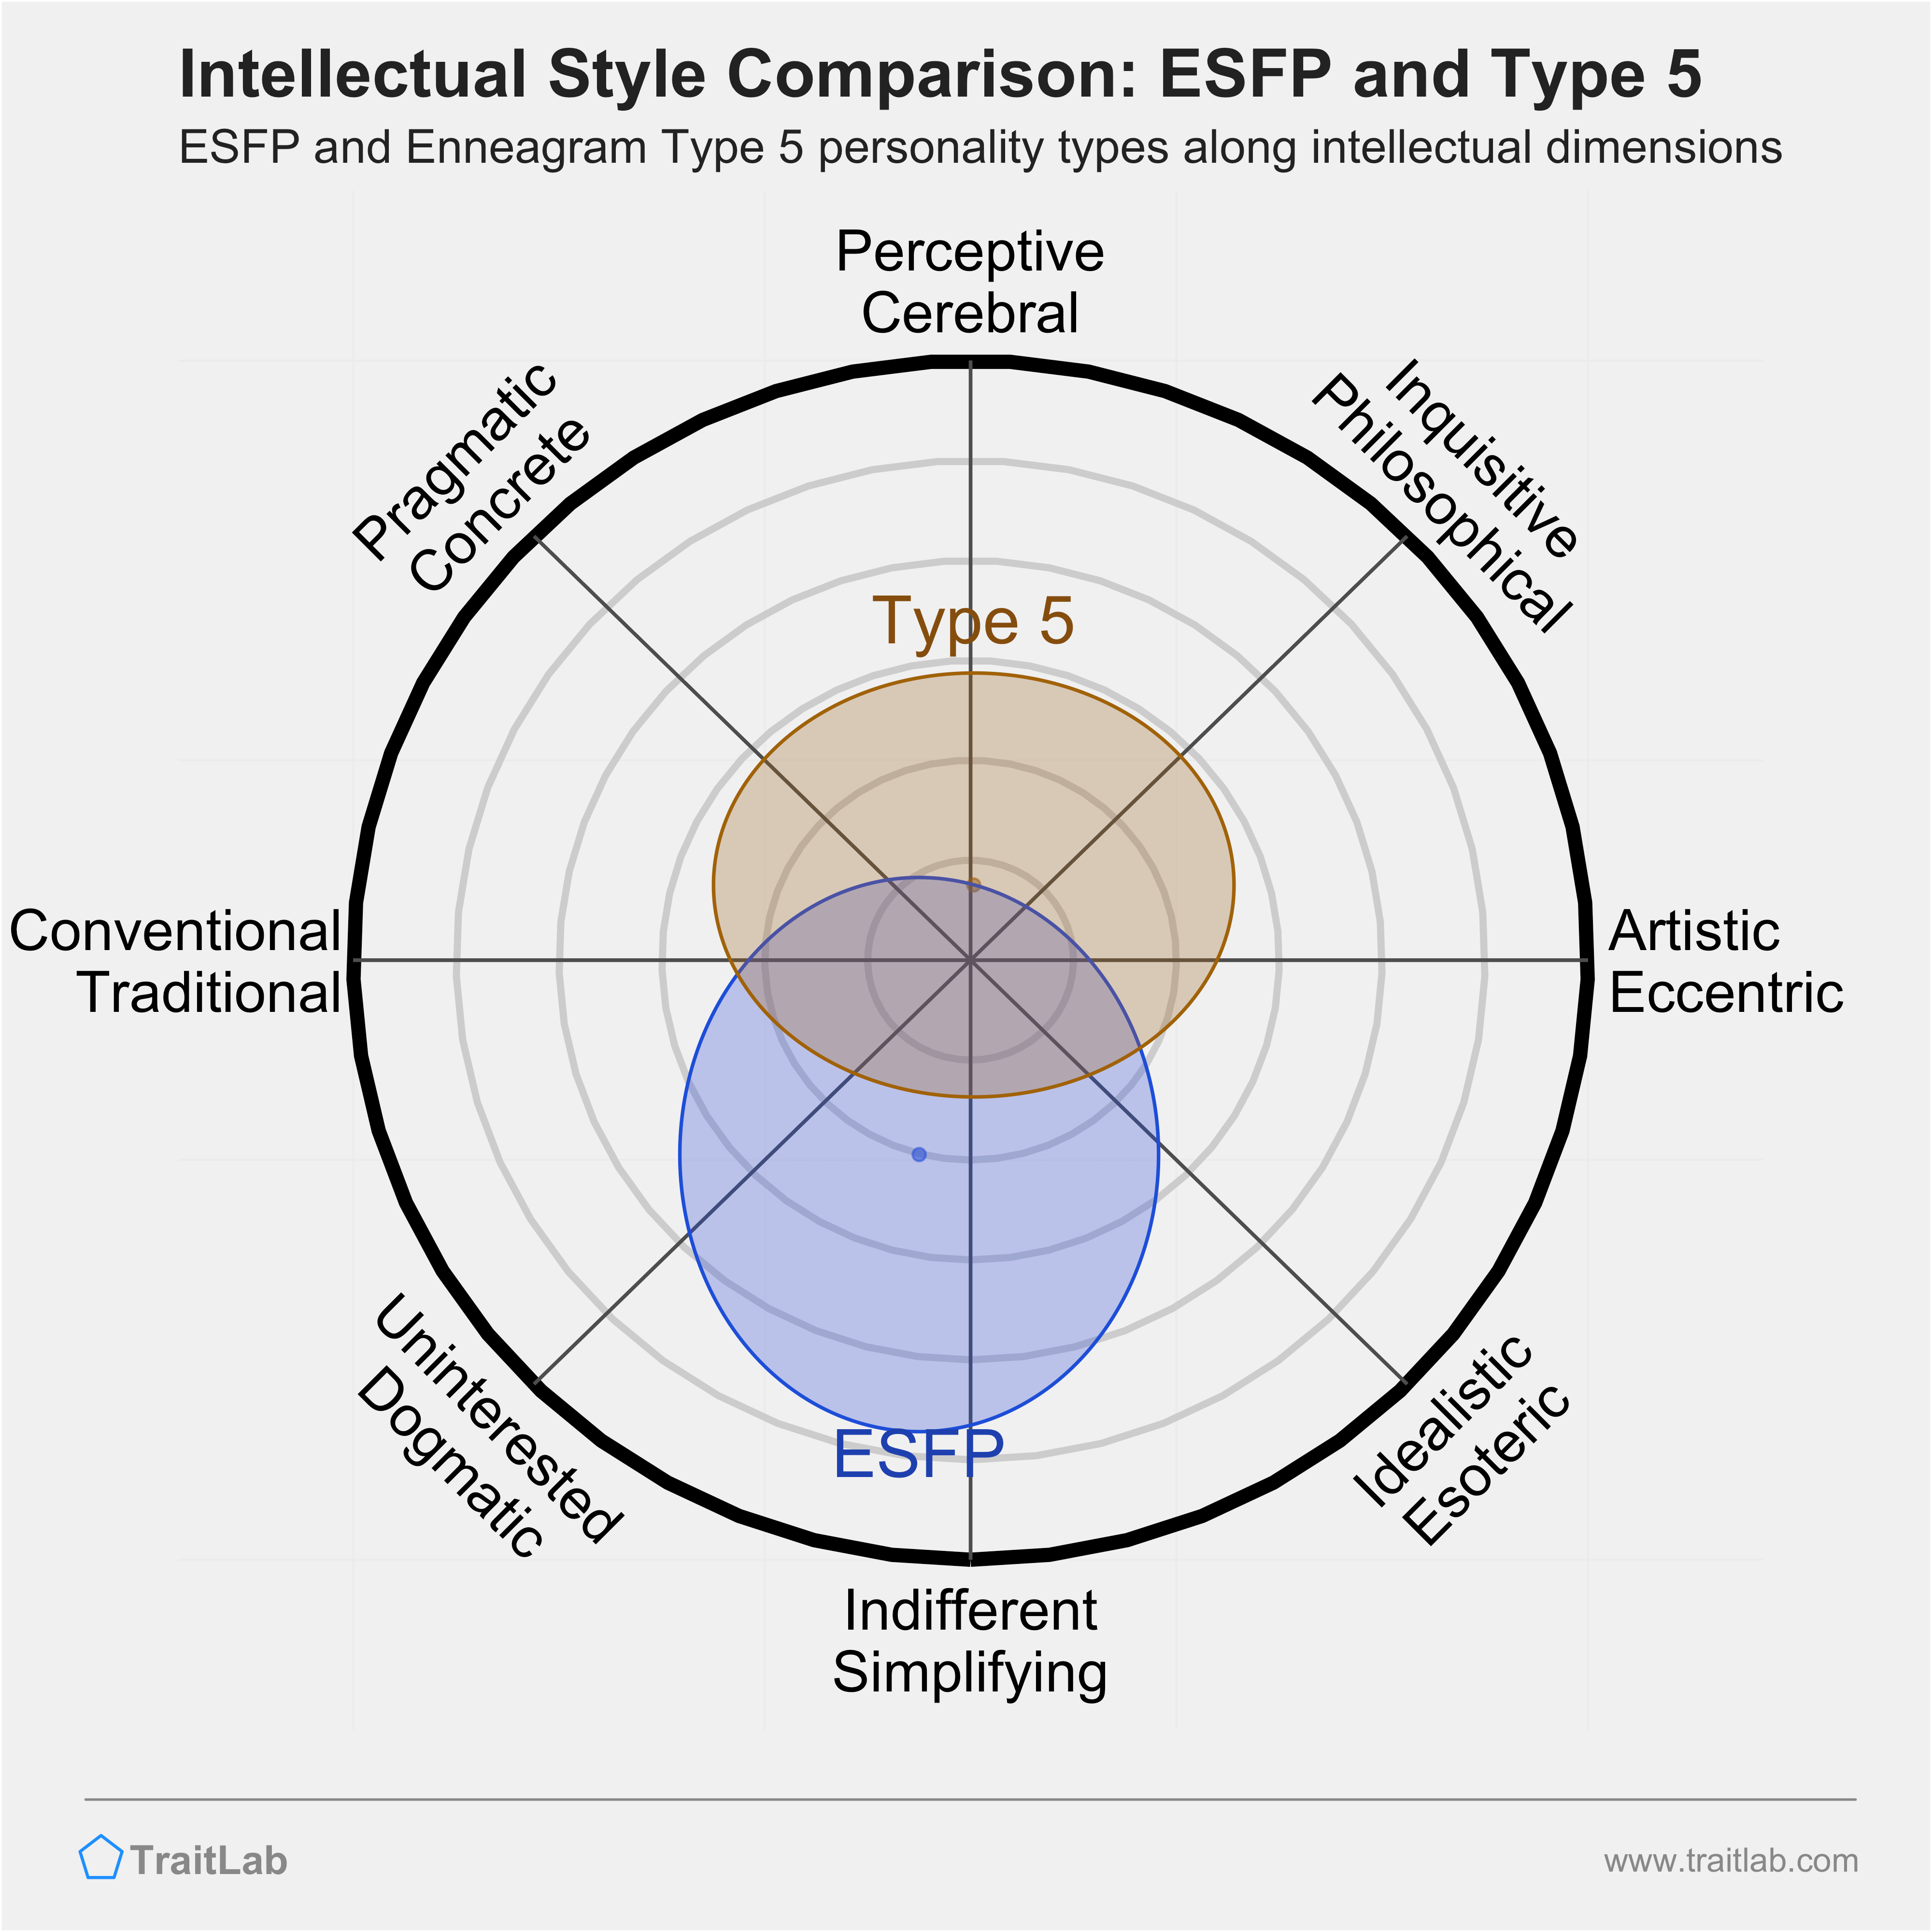 ESFP and Type 5 comparison across intellectual dimensions